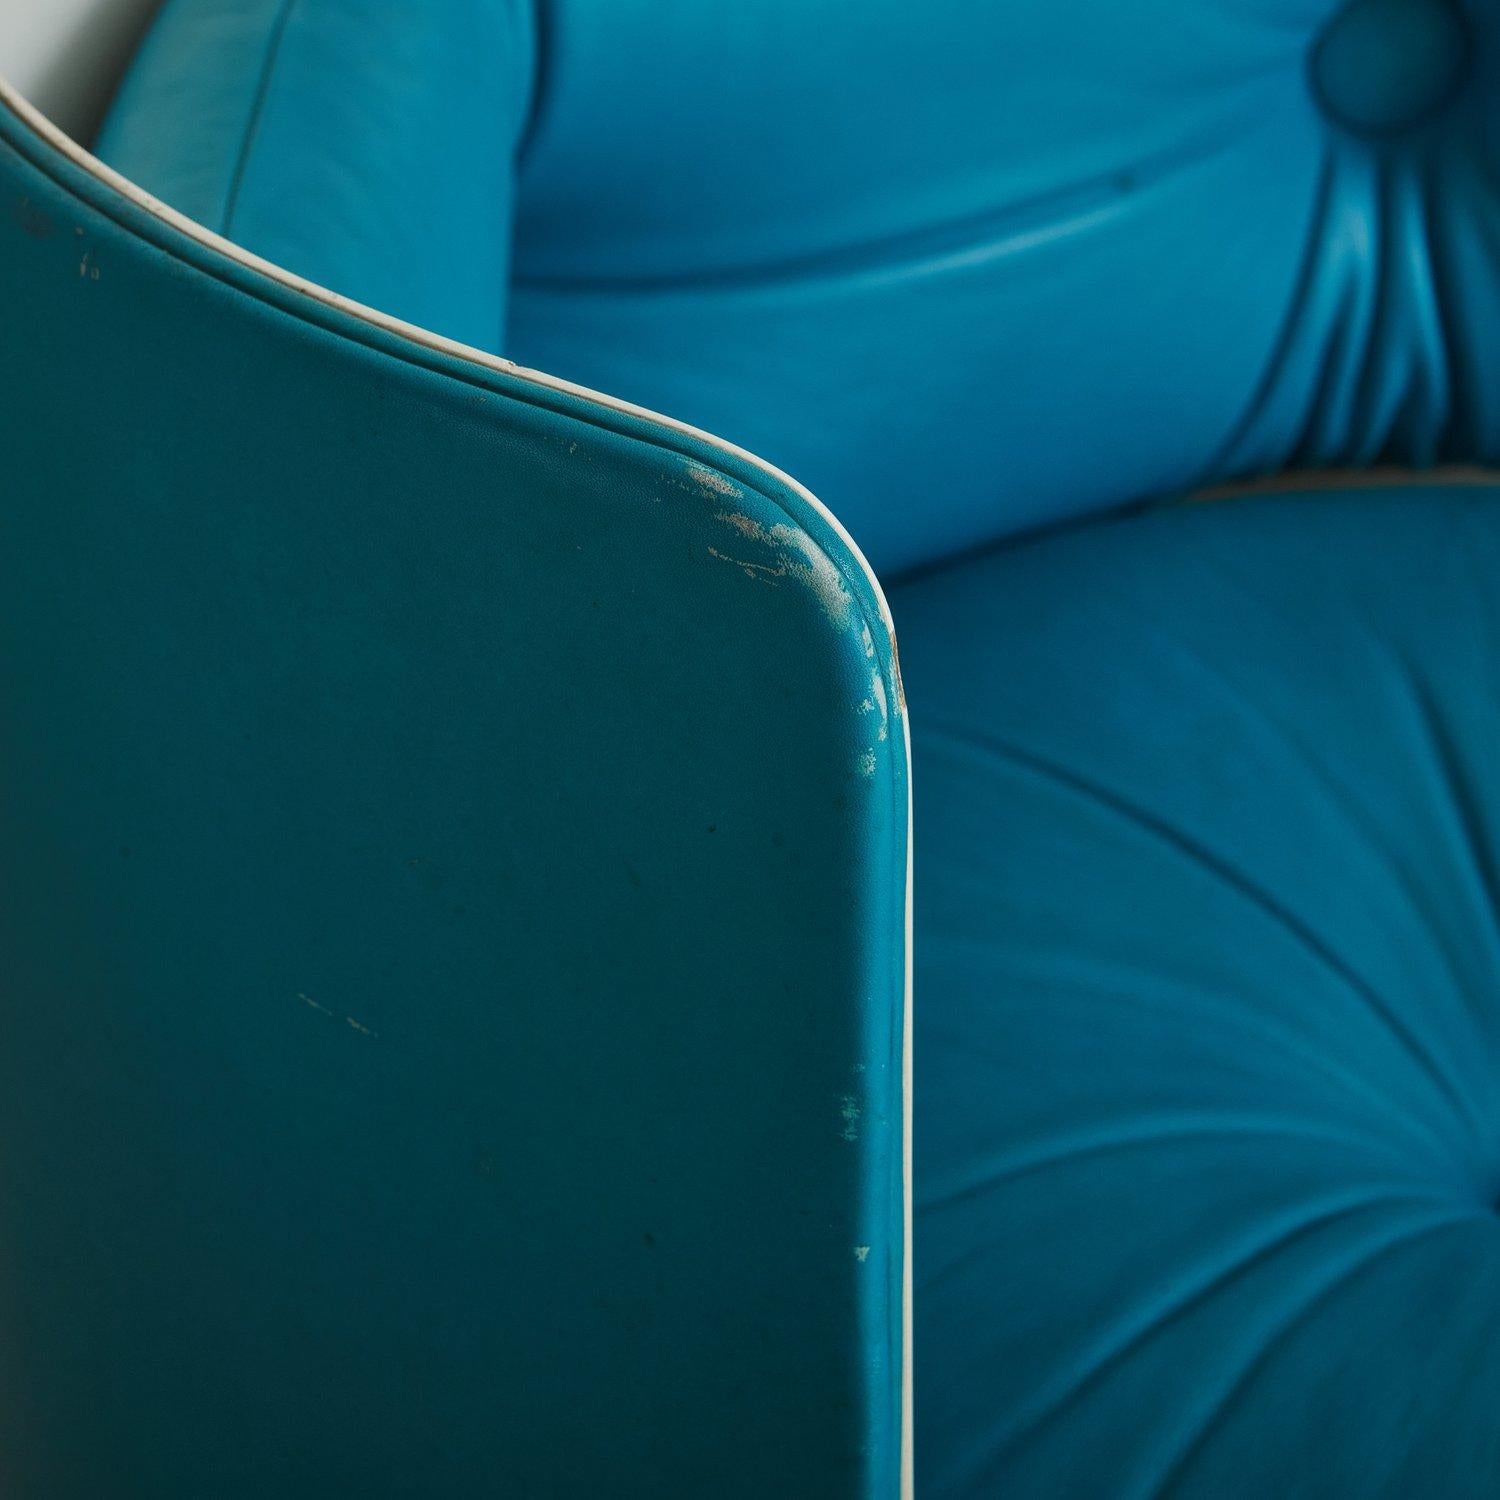 Leather Blue ‘Dilly Dally’ Chair by Luigi Massoni for Poltrona Frau, Italy 1968 For Sale